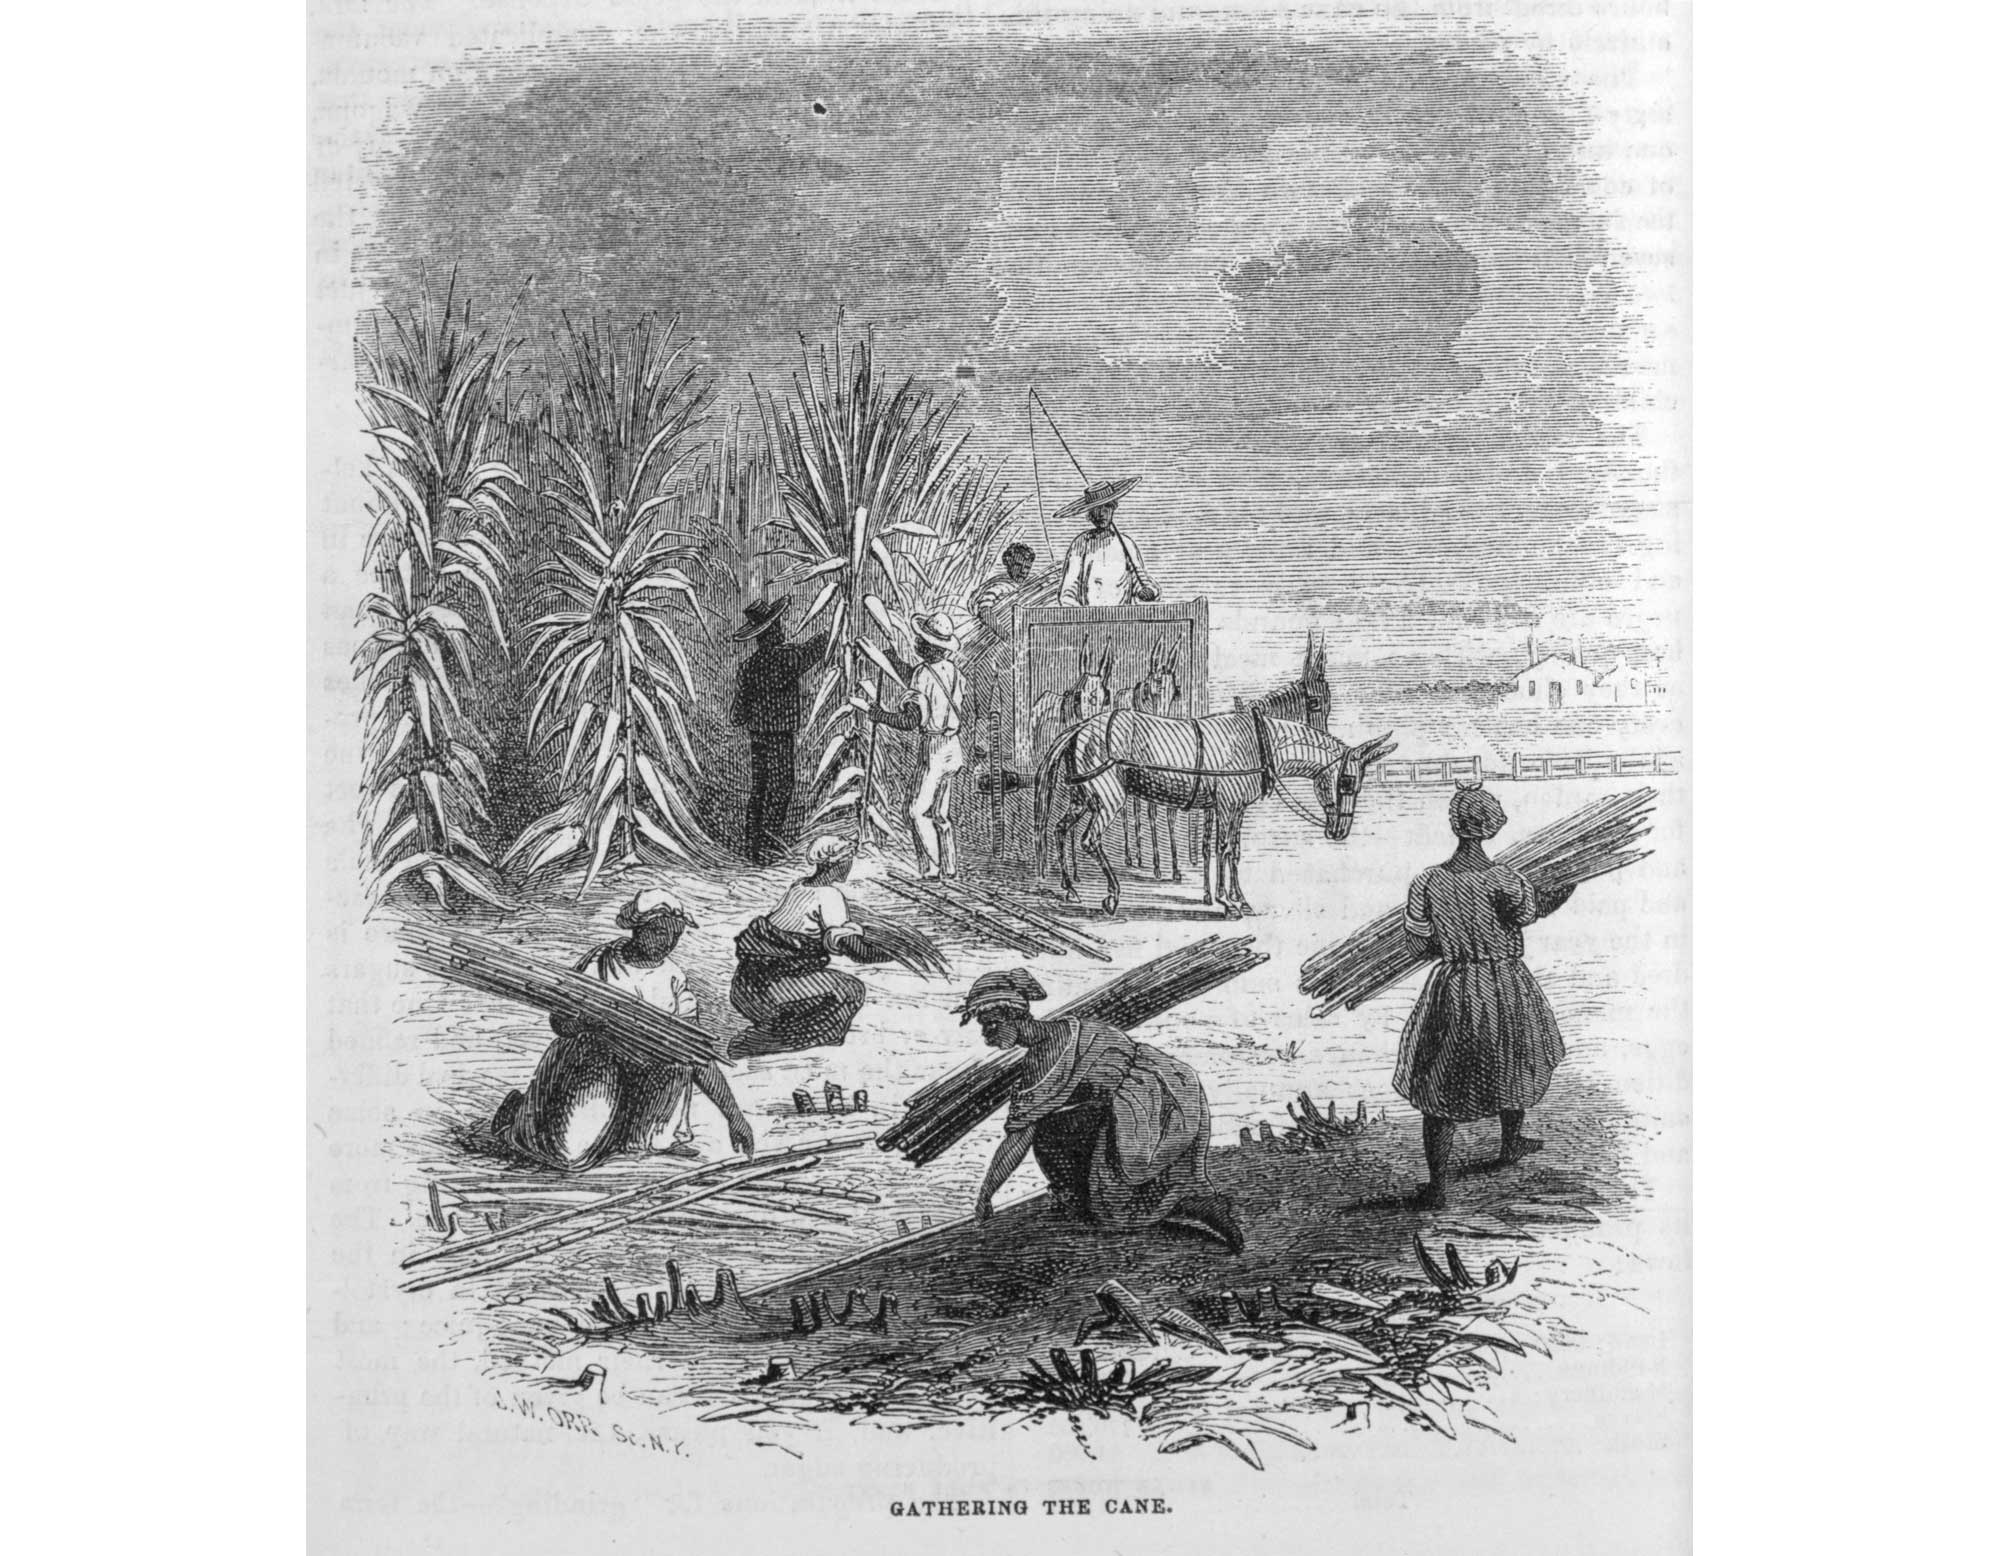 Black and white line illustration of enslaved Black people harvesting sugarcane in Louisiana, 1853. In the background, men cut canes from a field, with women gathering canes into bundles in the foreground. An overseer with a whip sits in a cart hitched to donkeys watches over the slaves while they work.